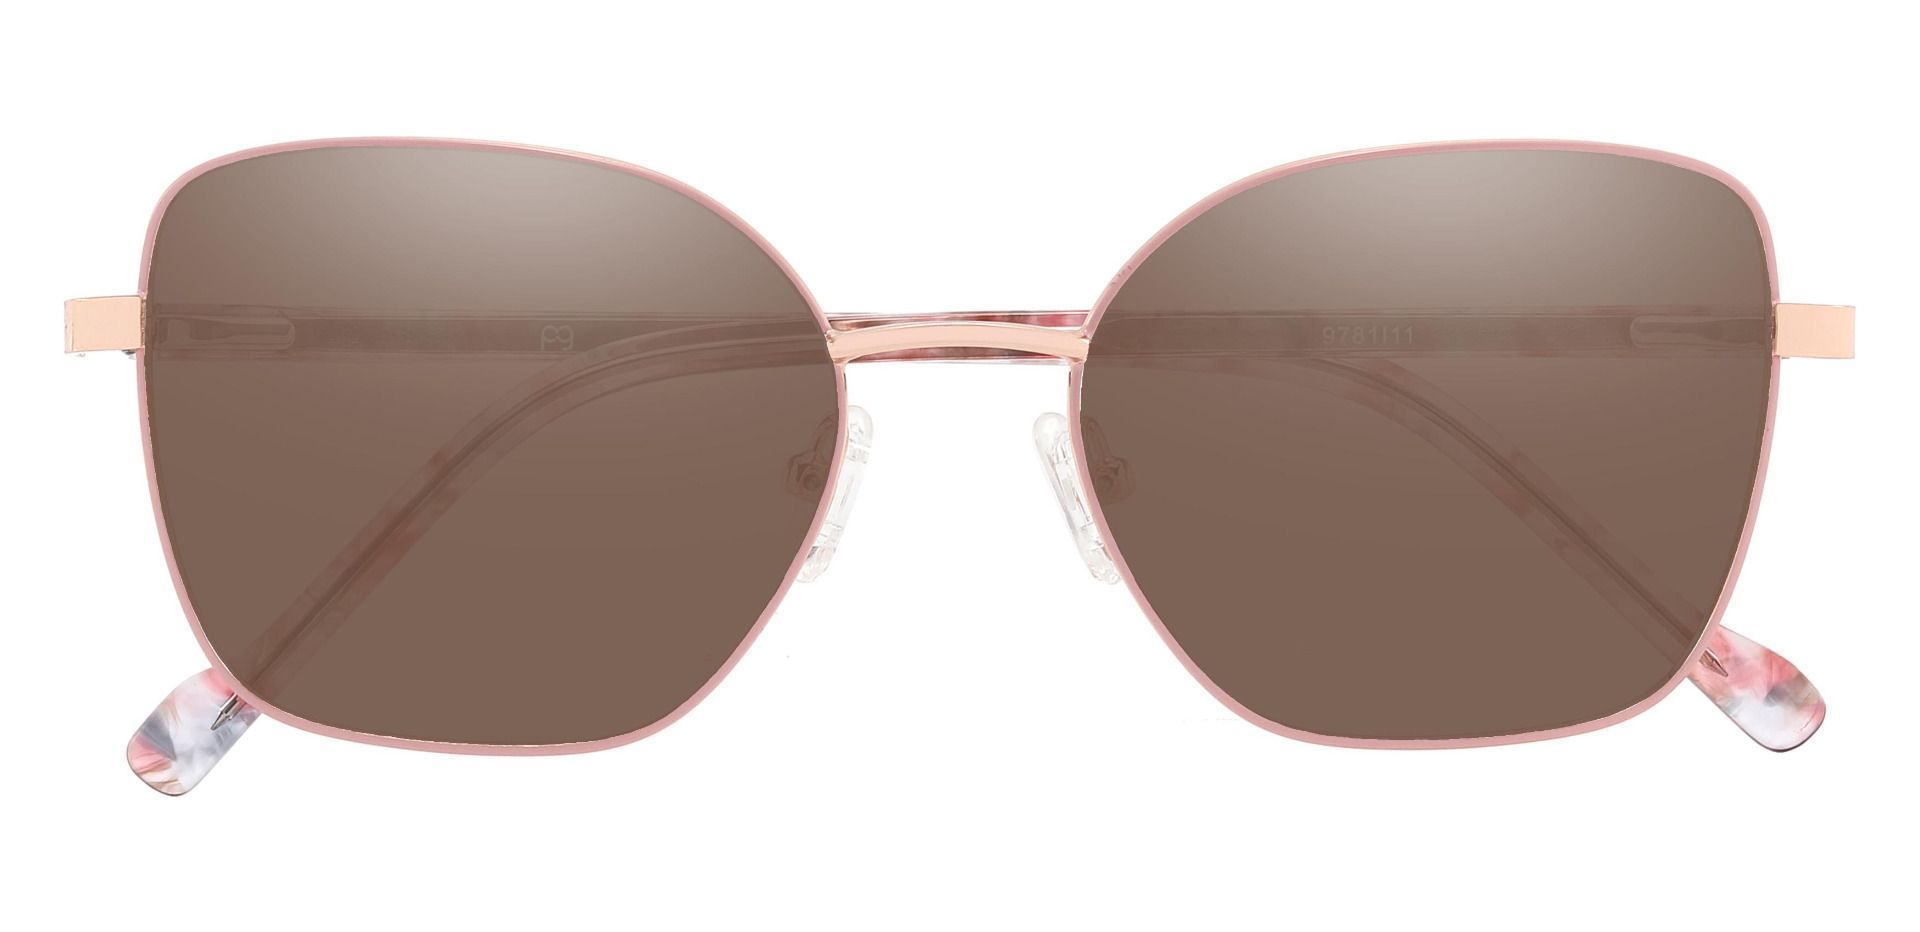 Hooper Geometric Non-Rx Sunglasses - Pink Frame With Brown Lenses